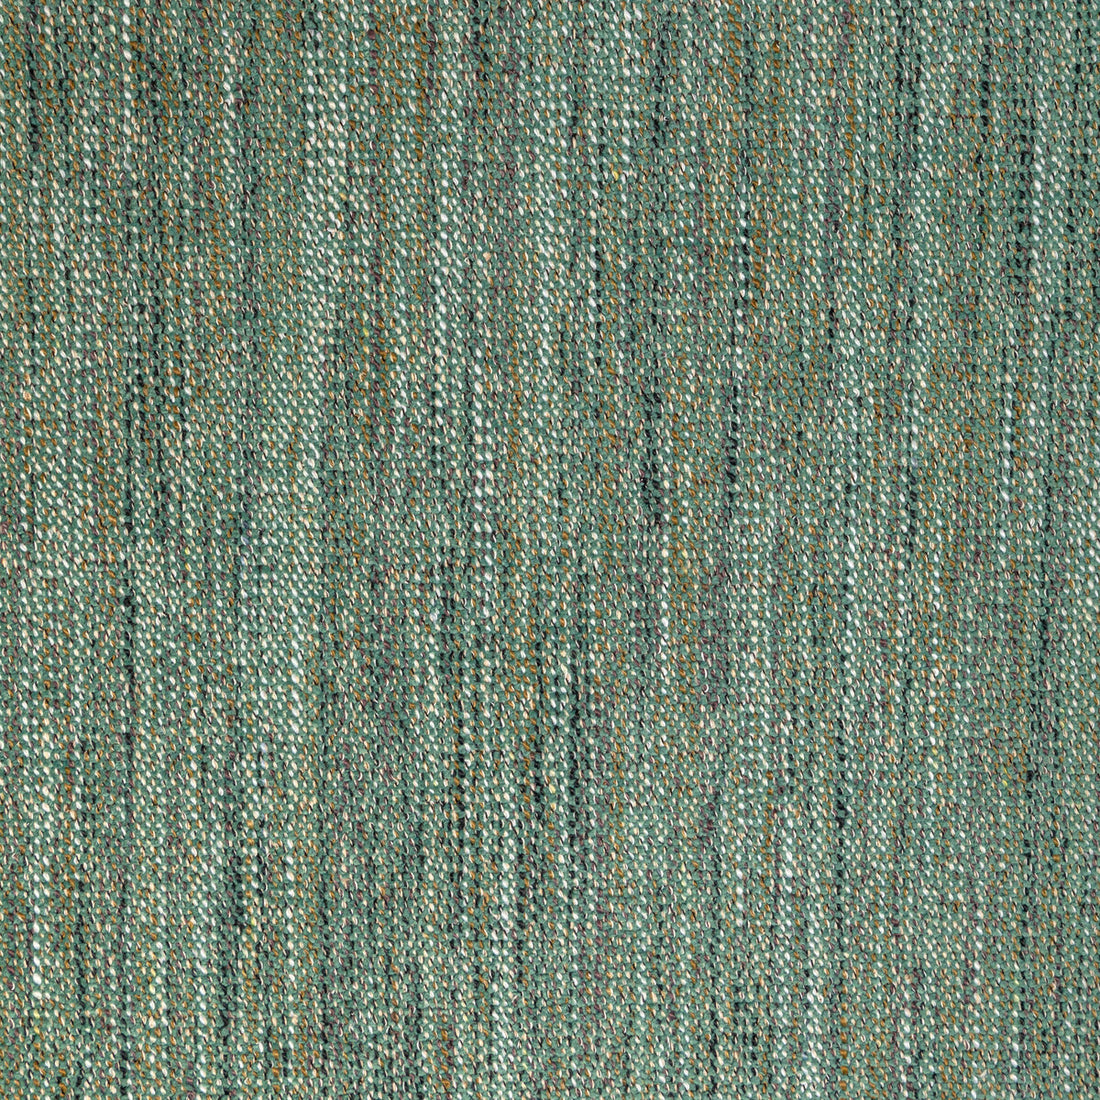 Delfino fabric in spearmint color - pattern 36748.3.0 - by Kravet Contract in the Refined Textures Performance Crypton collection